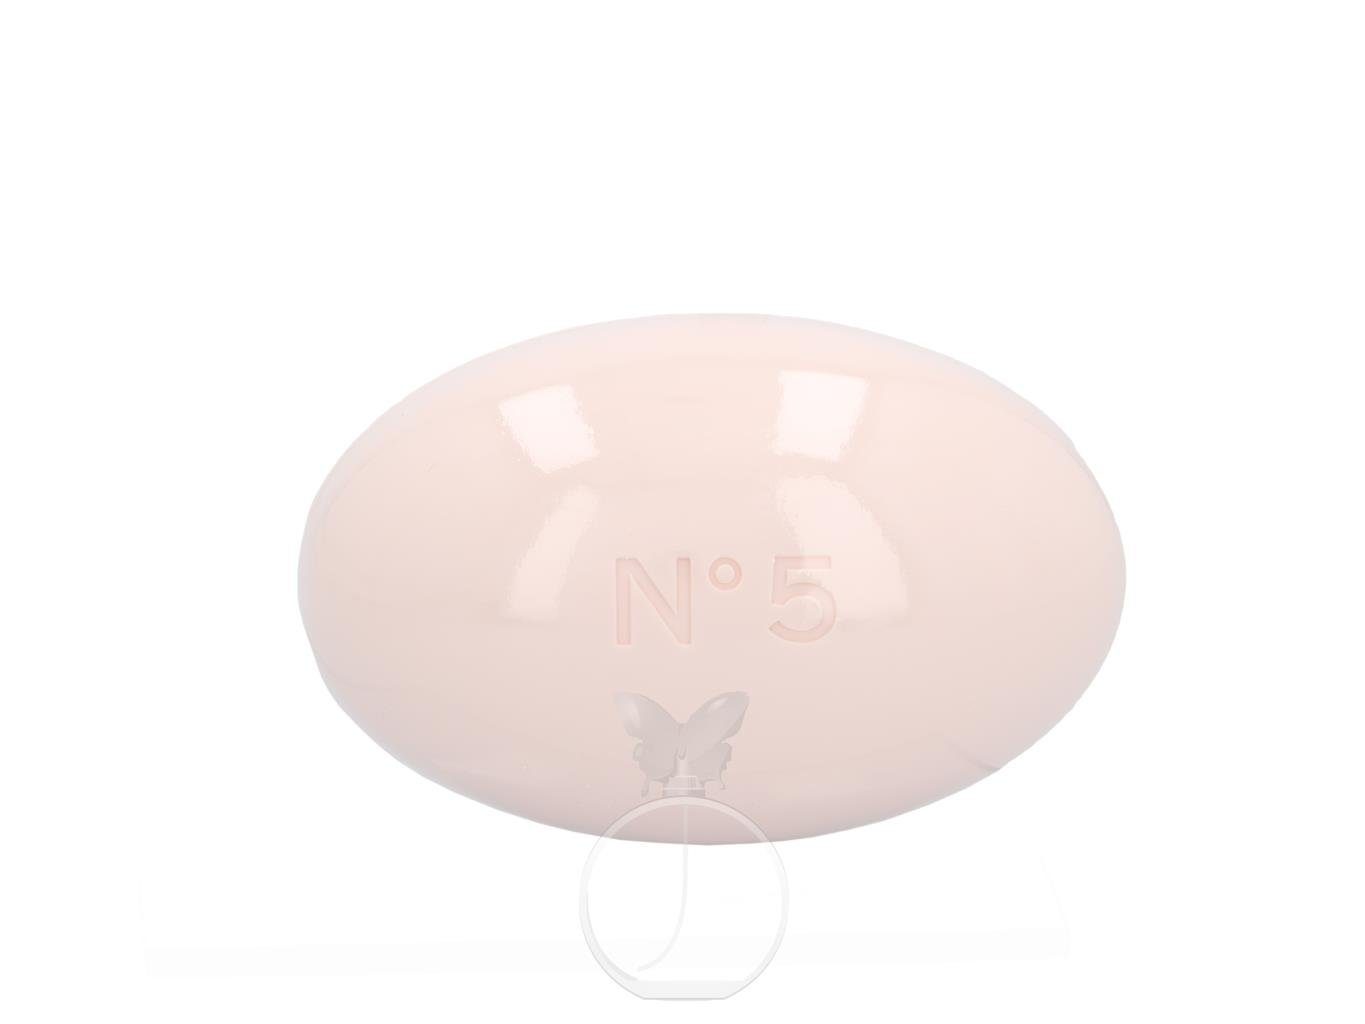 Chanel No.5 The Bath Soap (New Packaging) 150g/5.3oz buy to Japan.  CosmoStore Japan